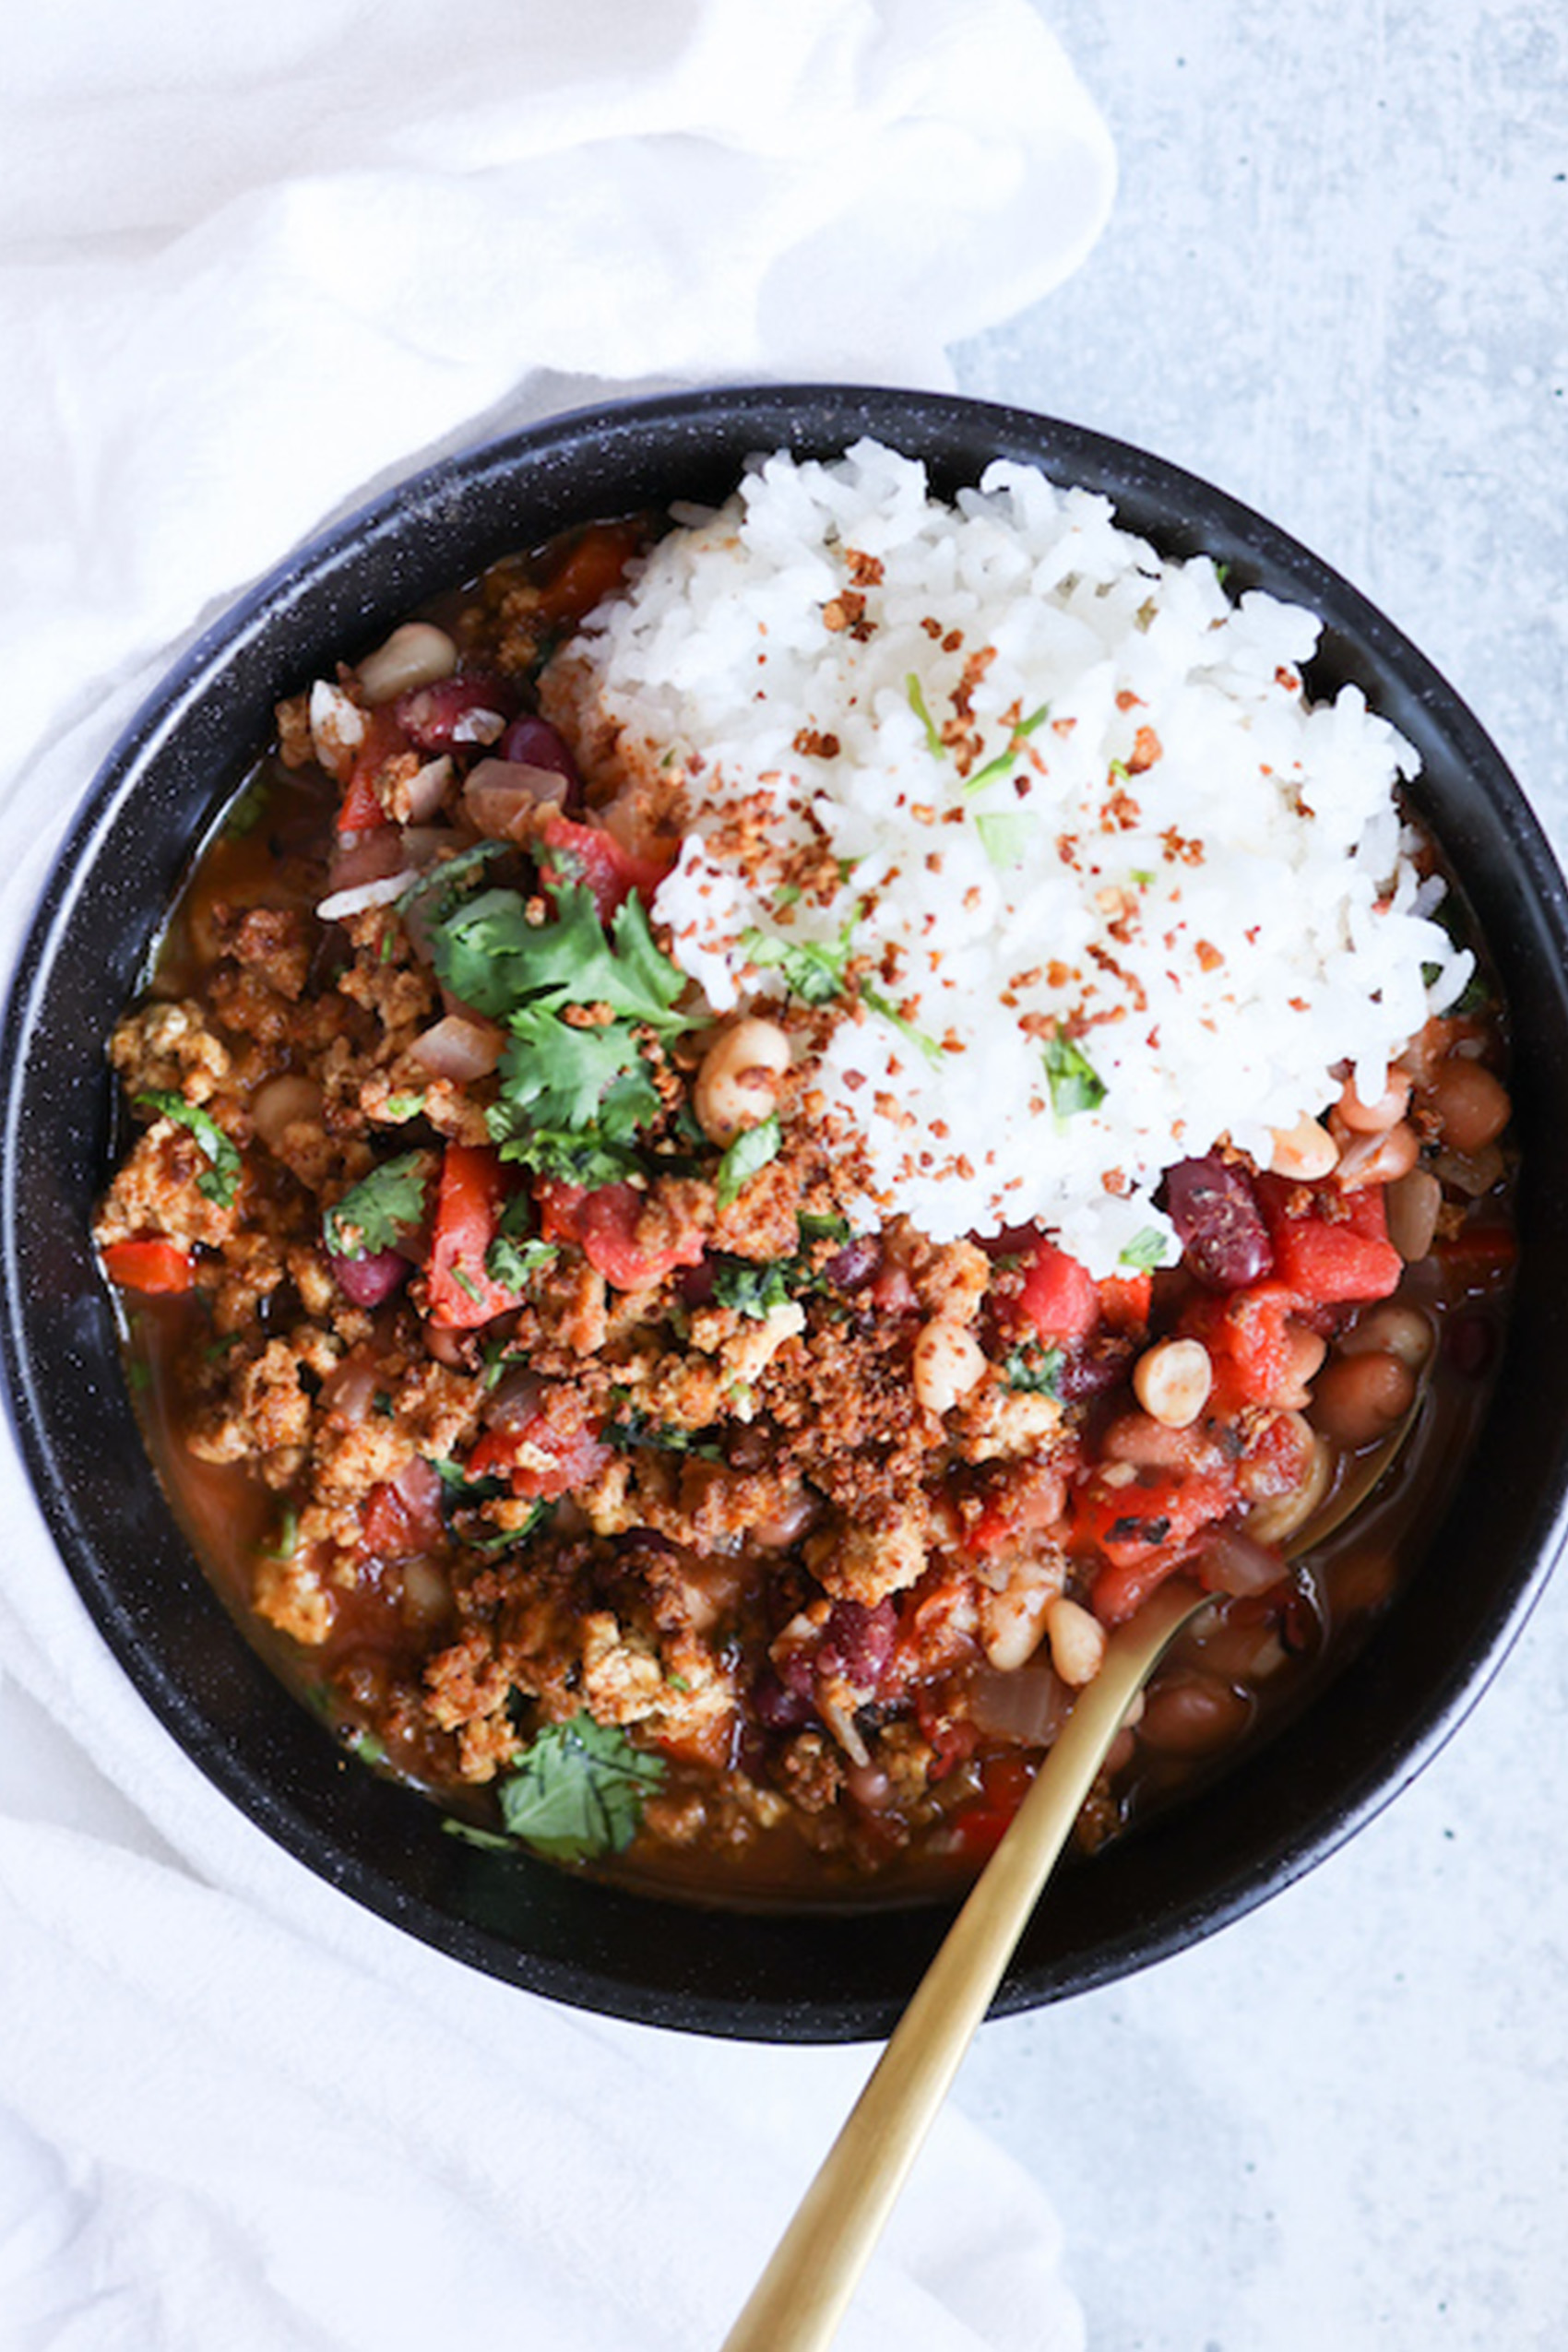 a bowl of vegan chili served with a scoop of white rice